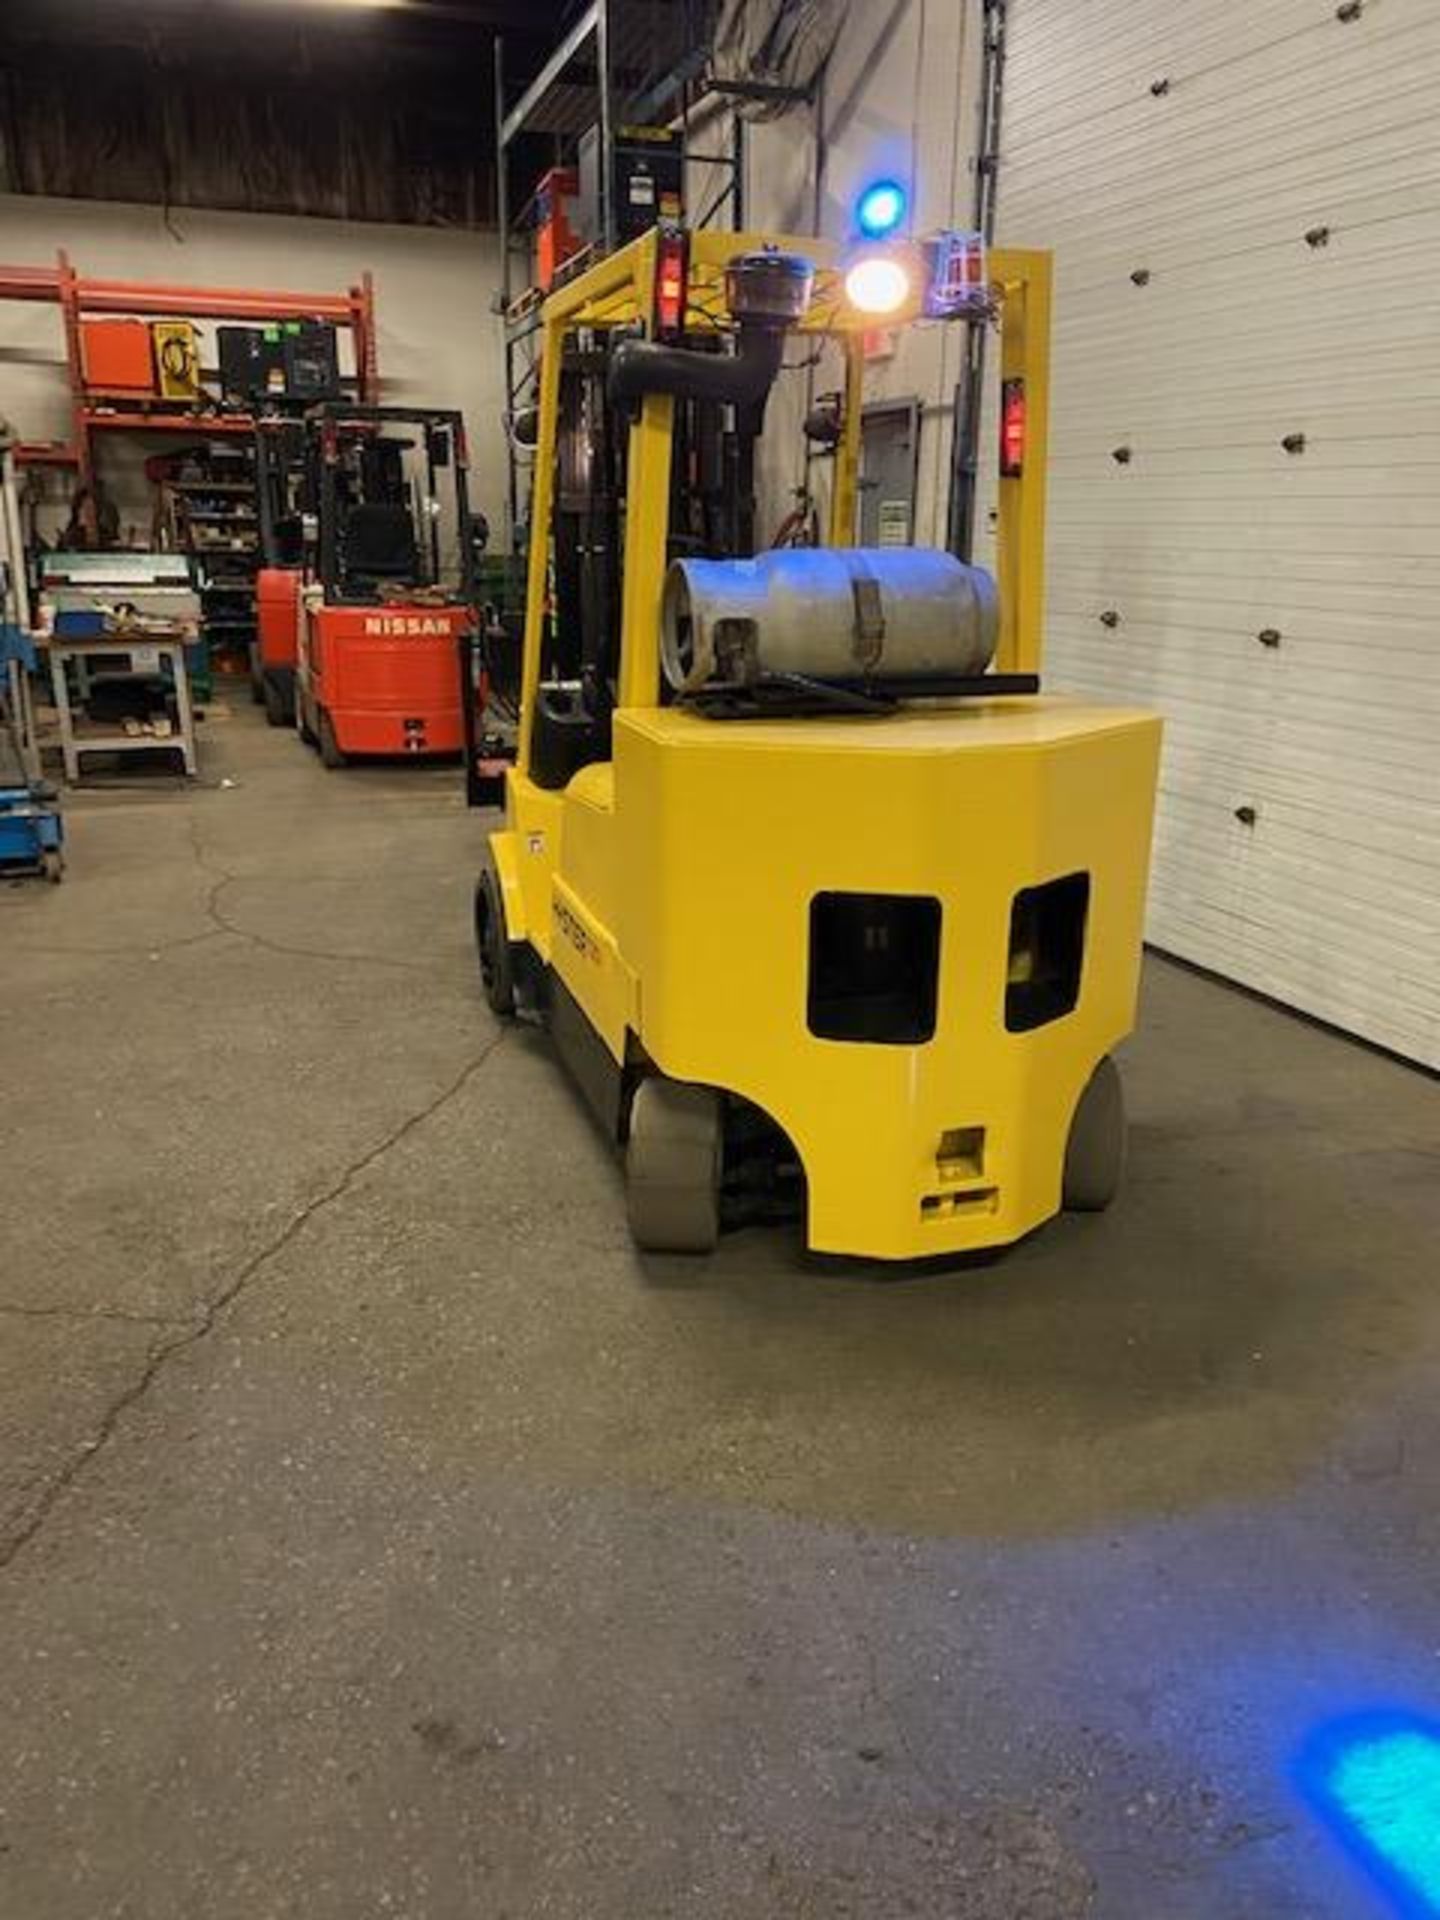 FREE CUSTOMS - Hyster 12,000lbs Capacity Forklift LPG (propane) with NEW 72" Forks and NEW - Image 3 of 3